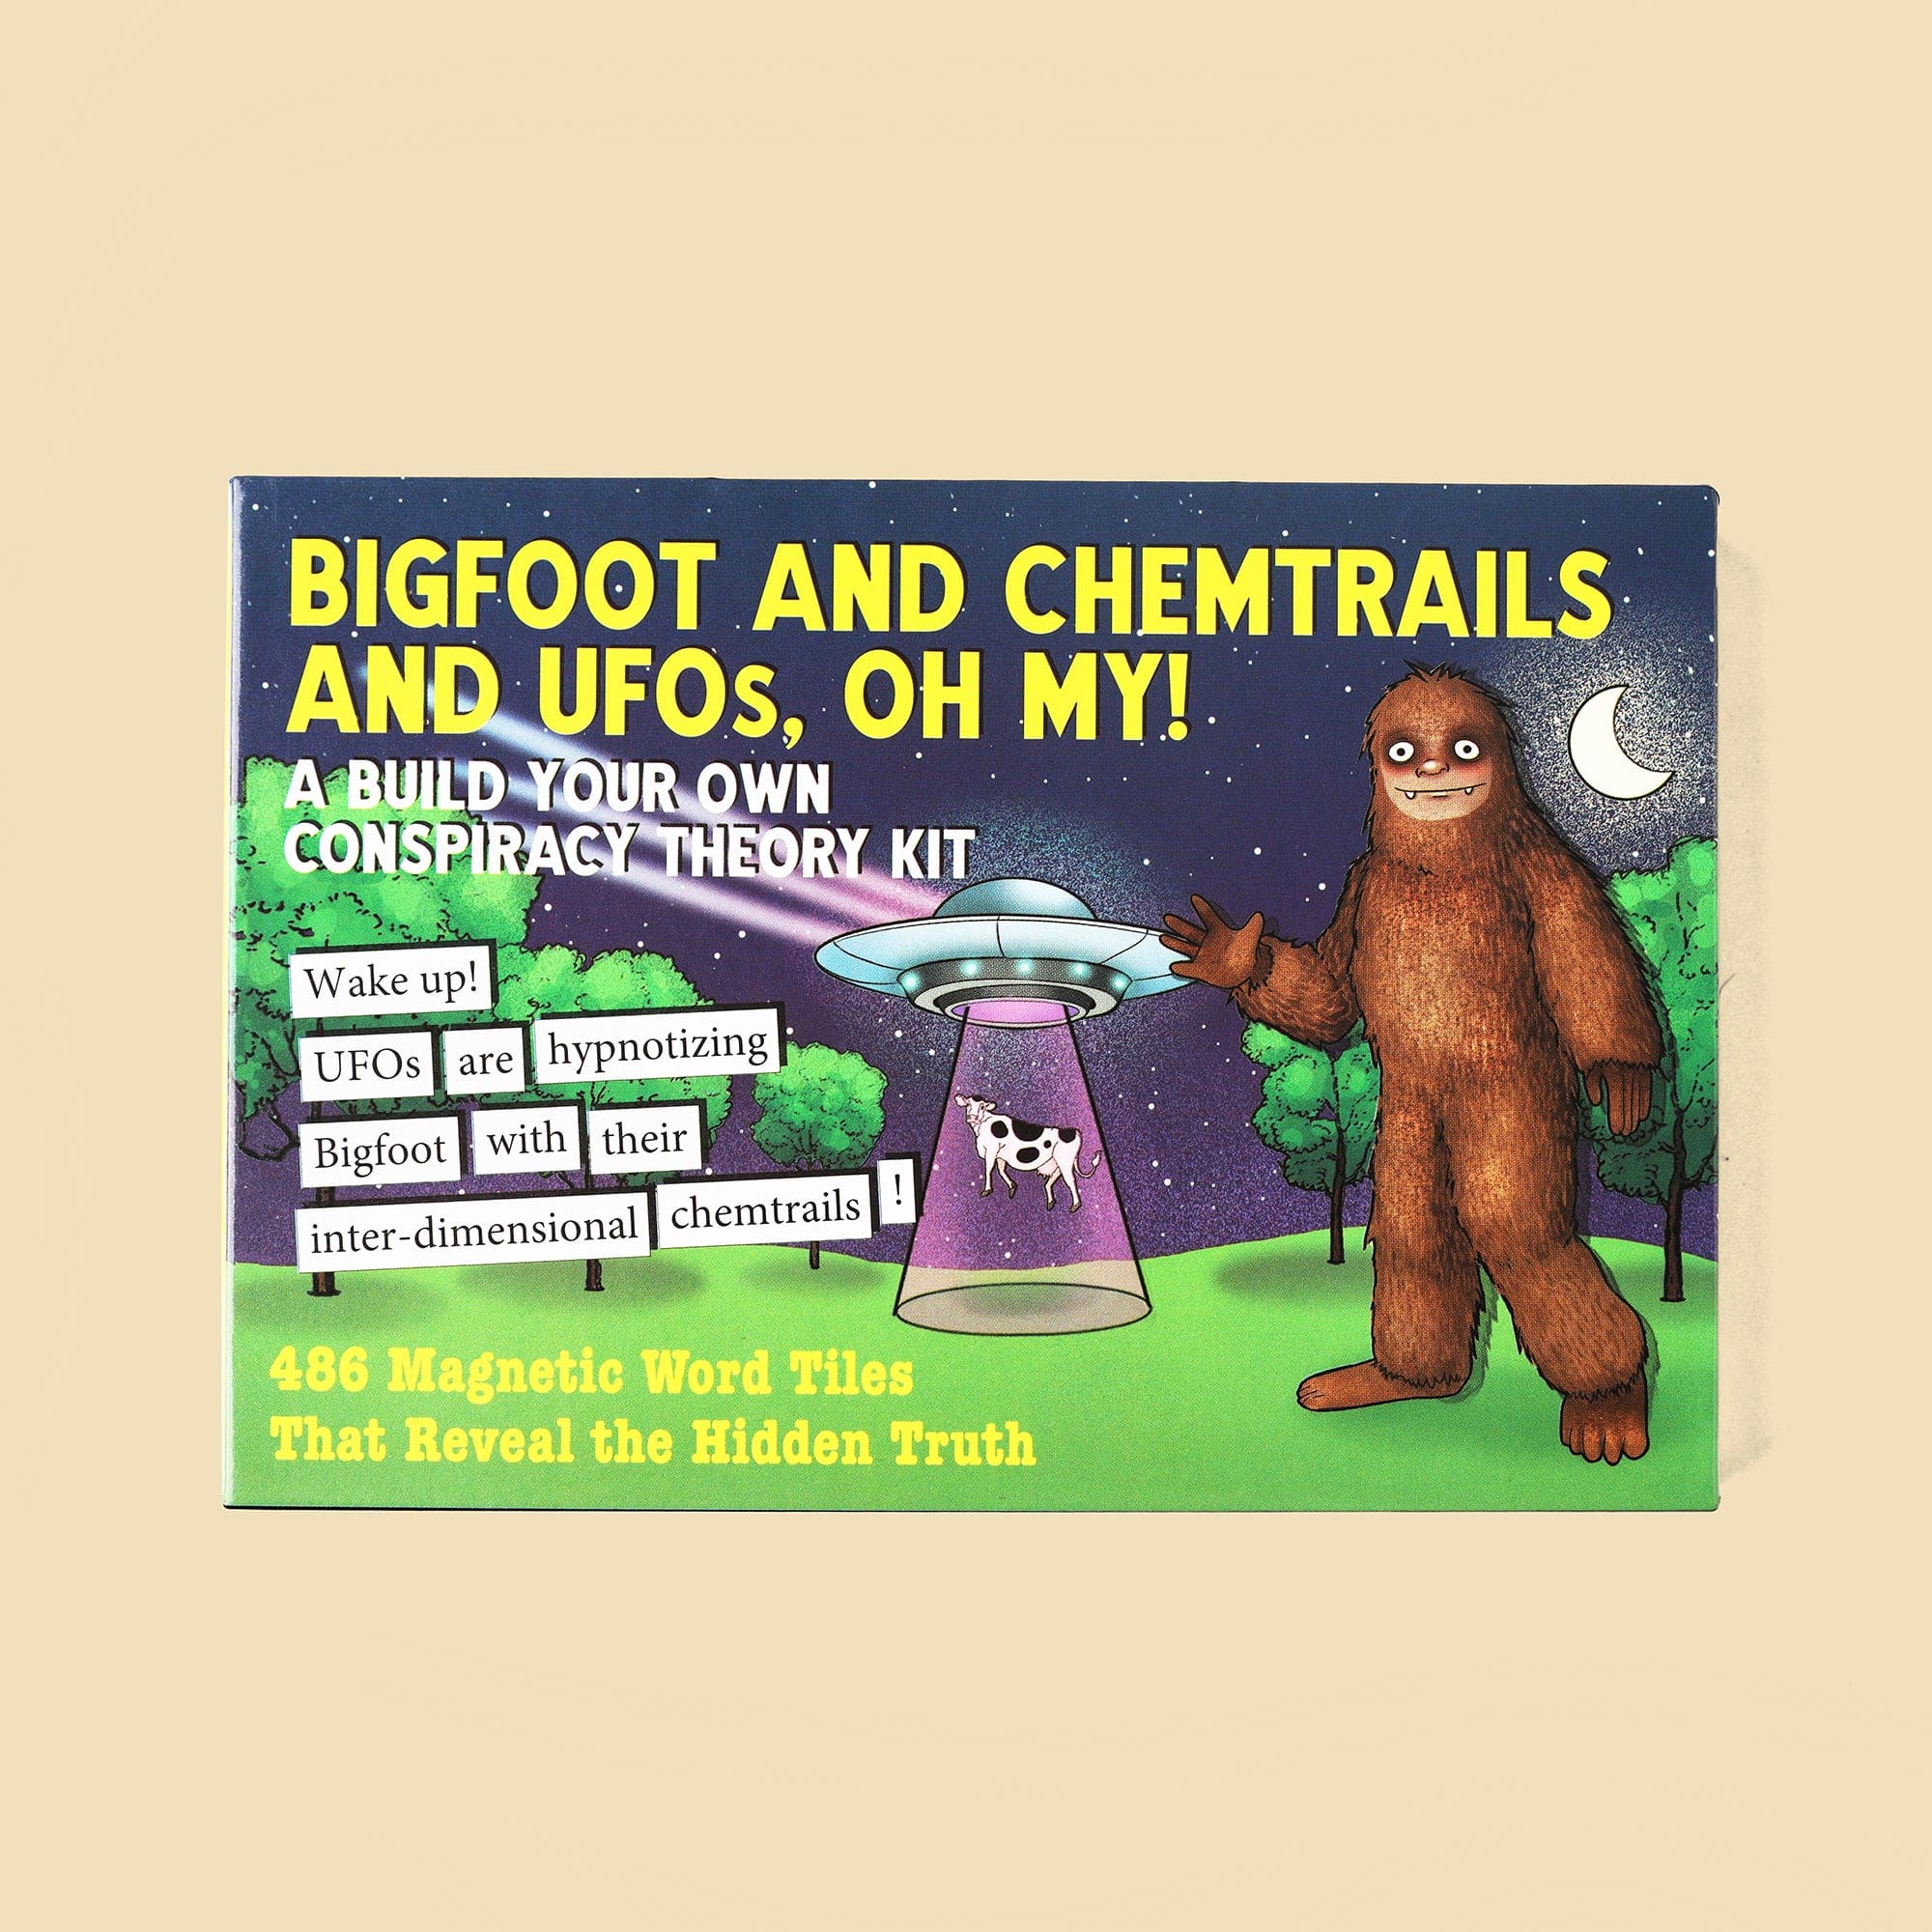 Bigfoot and Chemtrails and UFOs, Oh My! Conspiracy Theory Kit